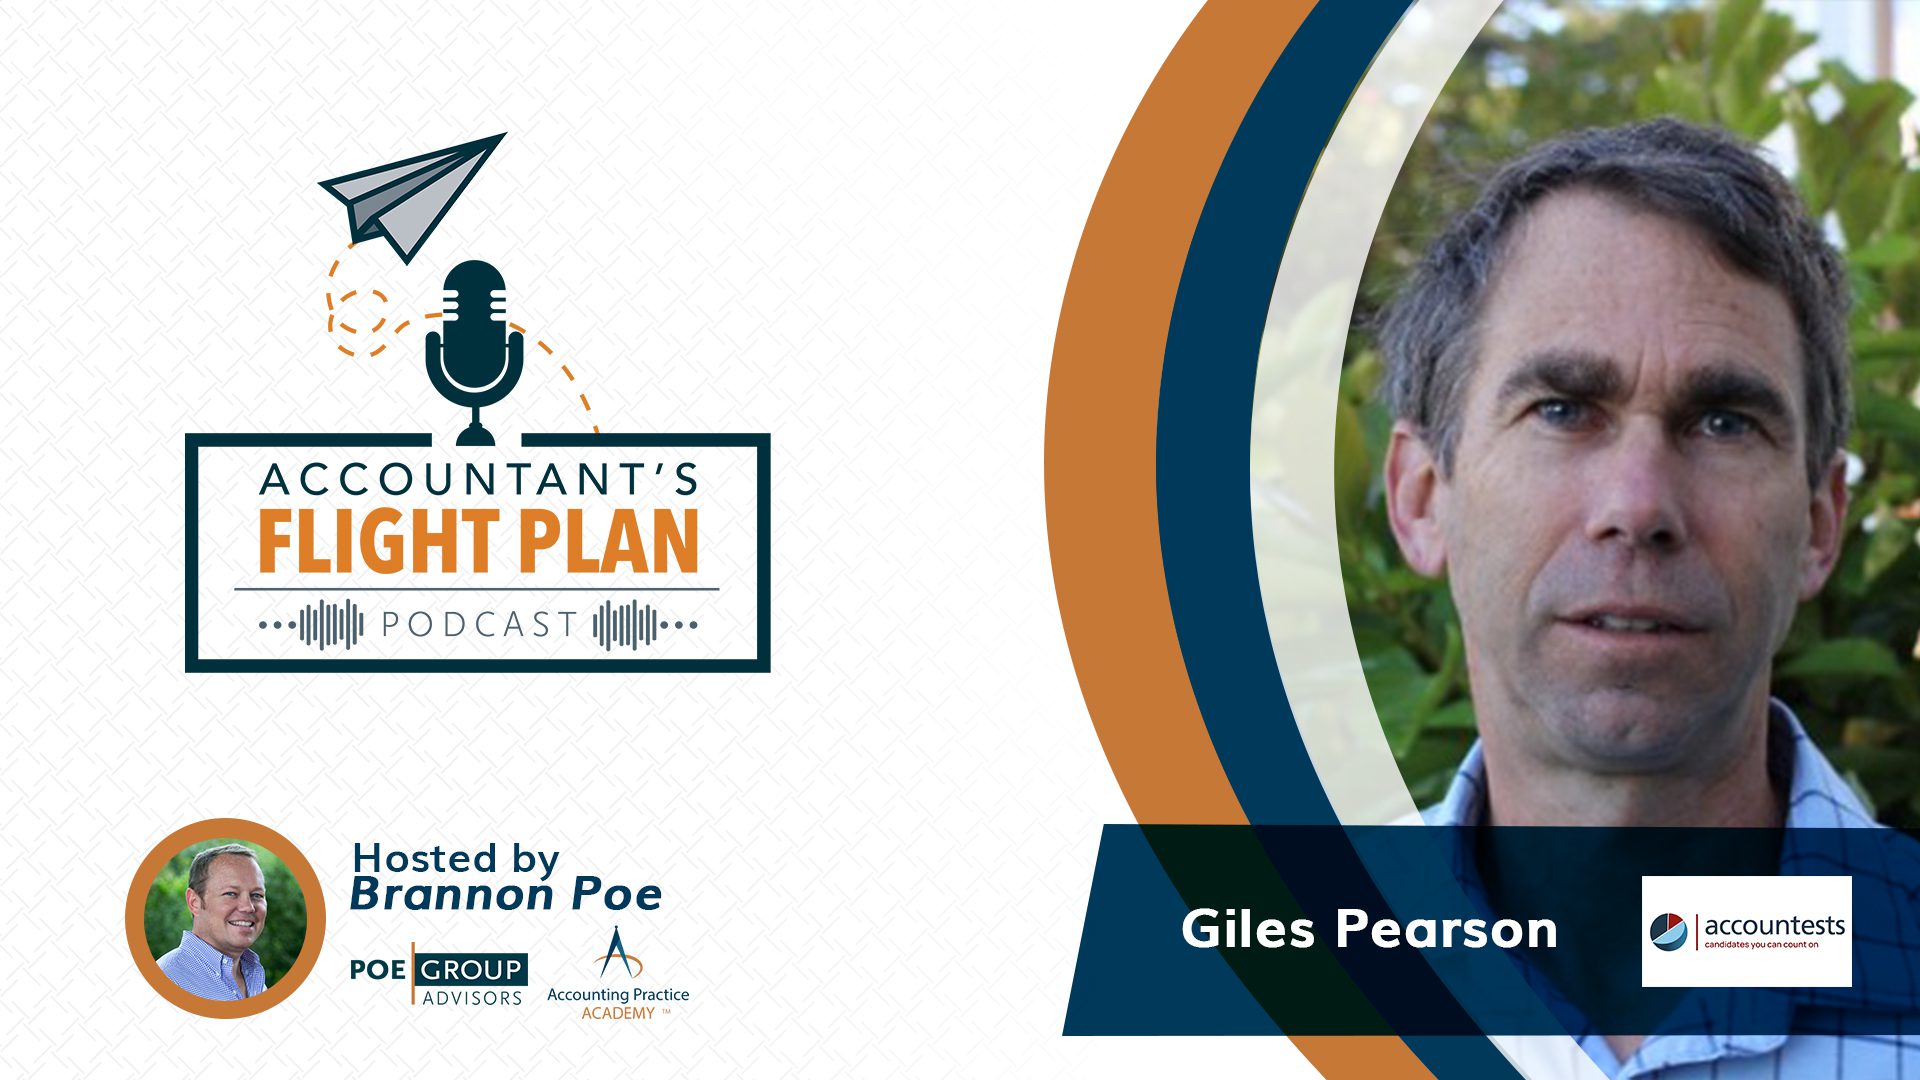 Accountant's Flight Plan podcast with Giles Pearson